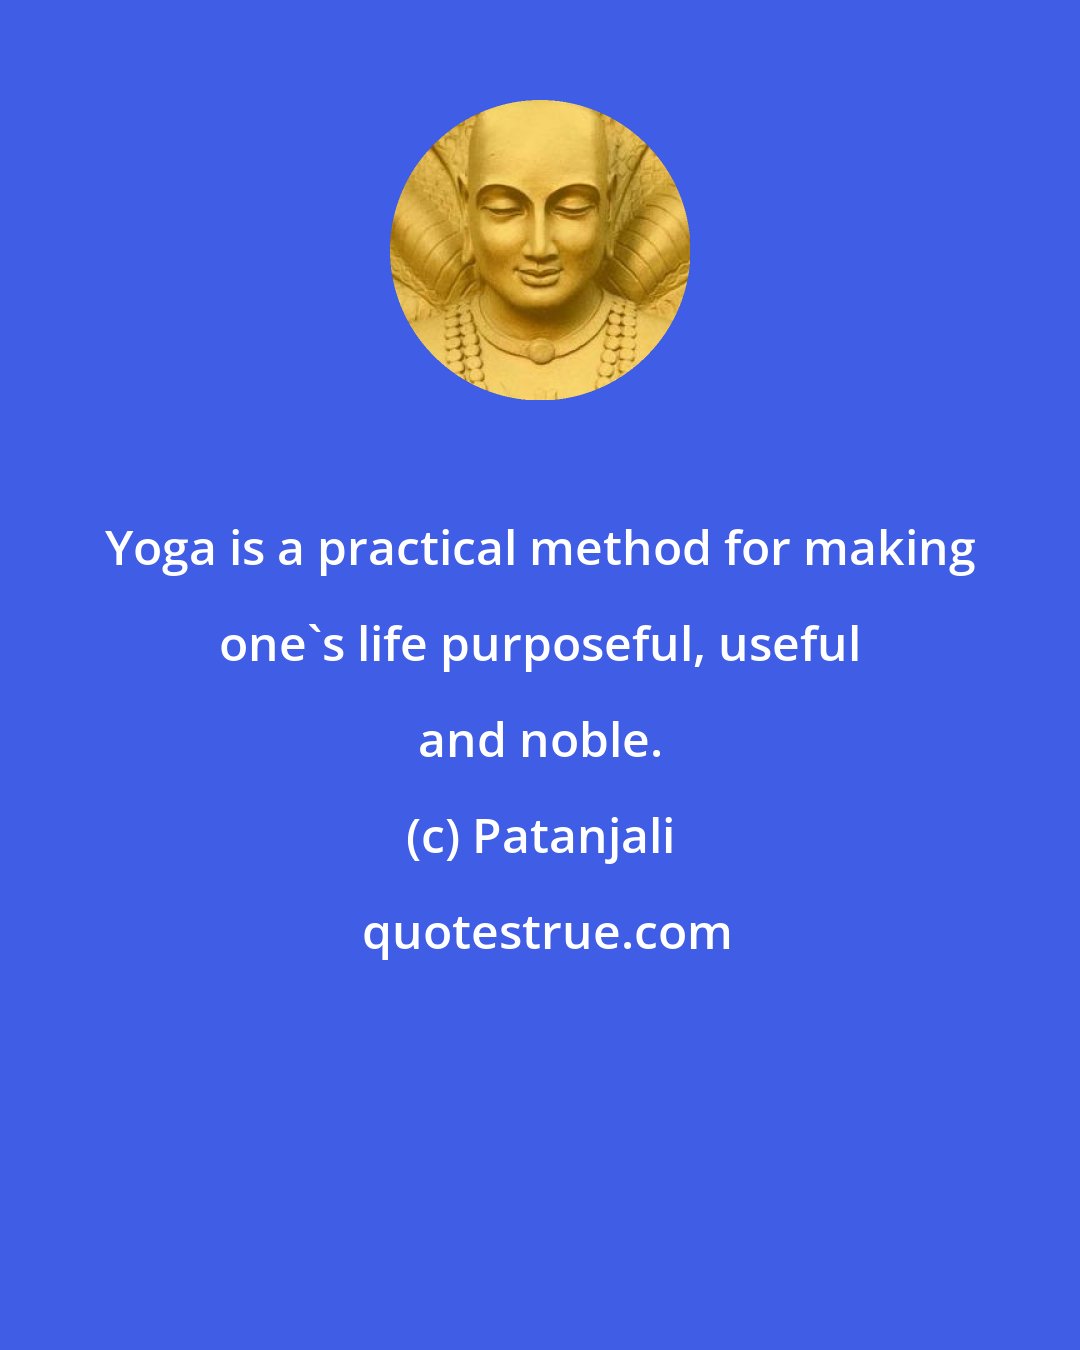 Patanjali: Yoga is a practical method for making one's life purposeful, useful and noble.